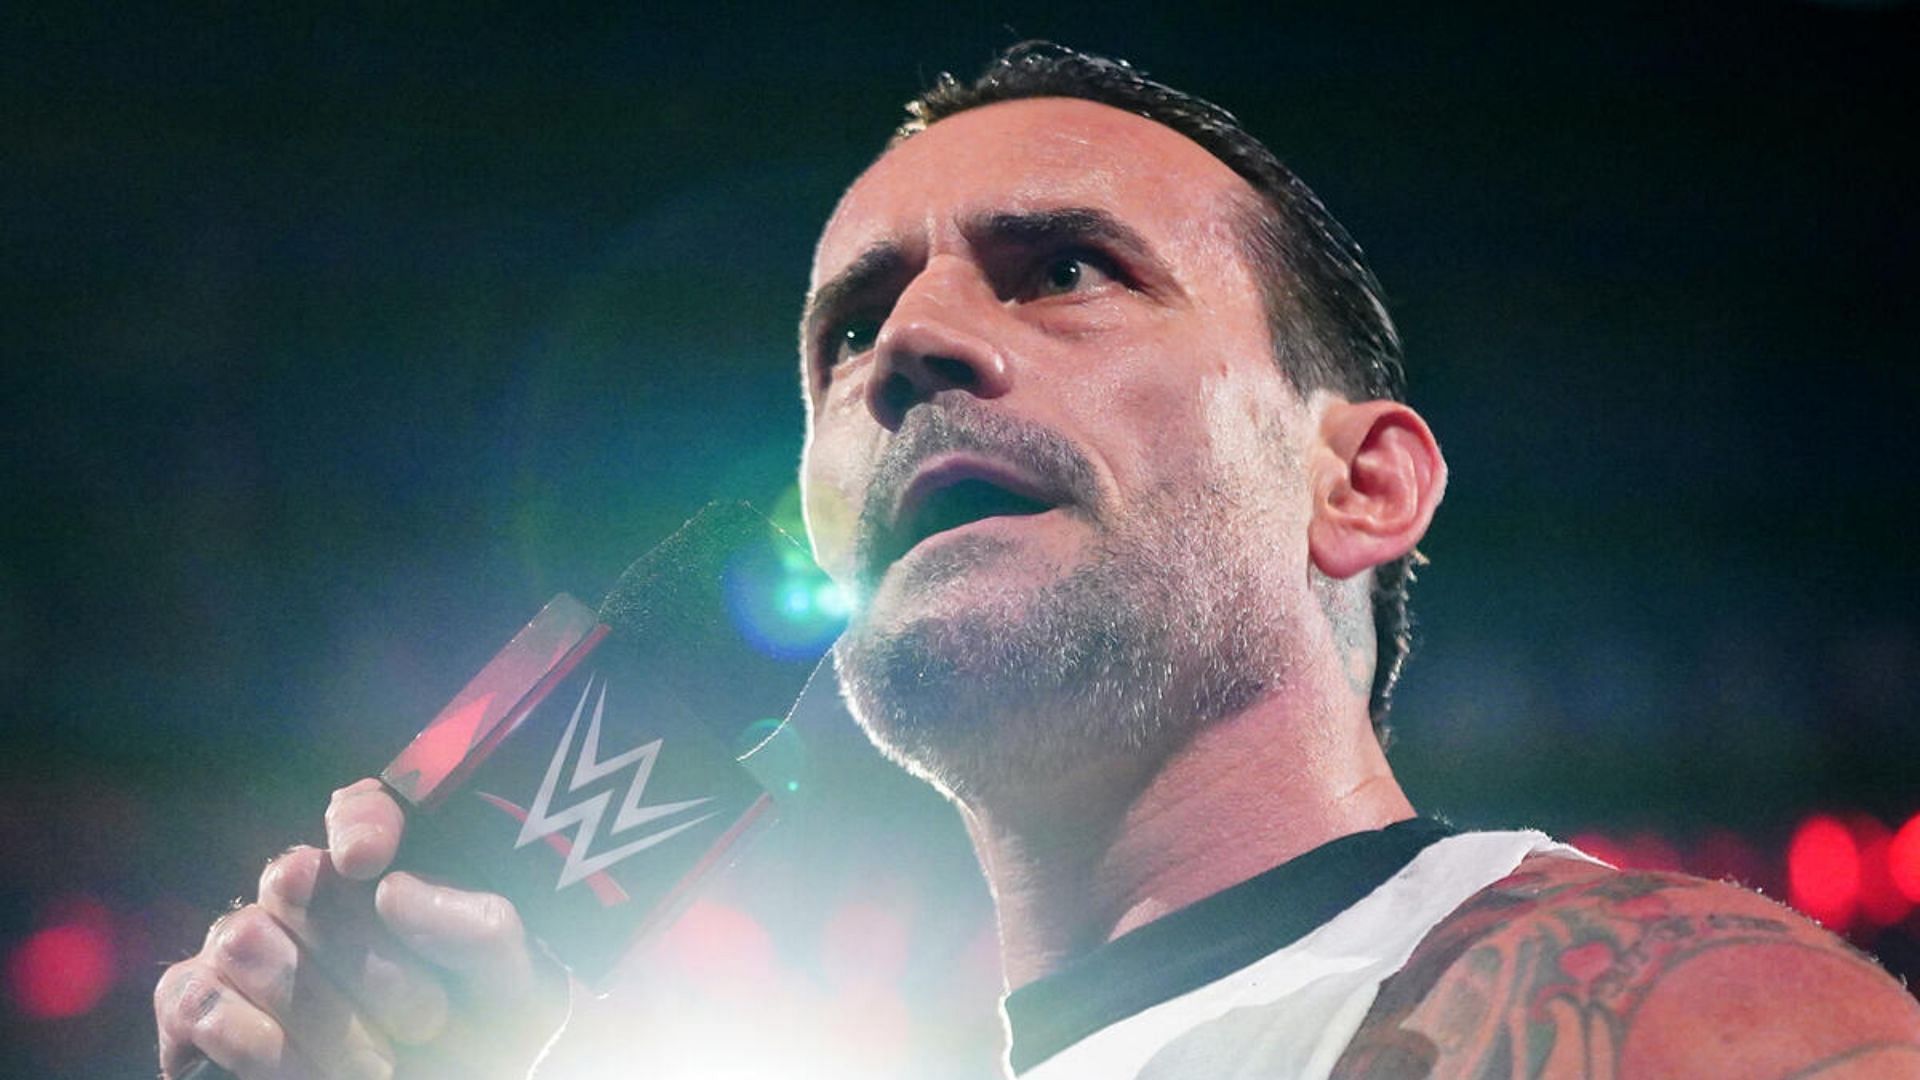 CM Punk has made a WWE Superstar very angry (Credit: WWE)